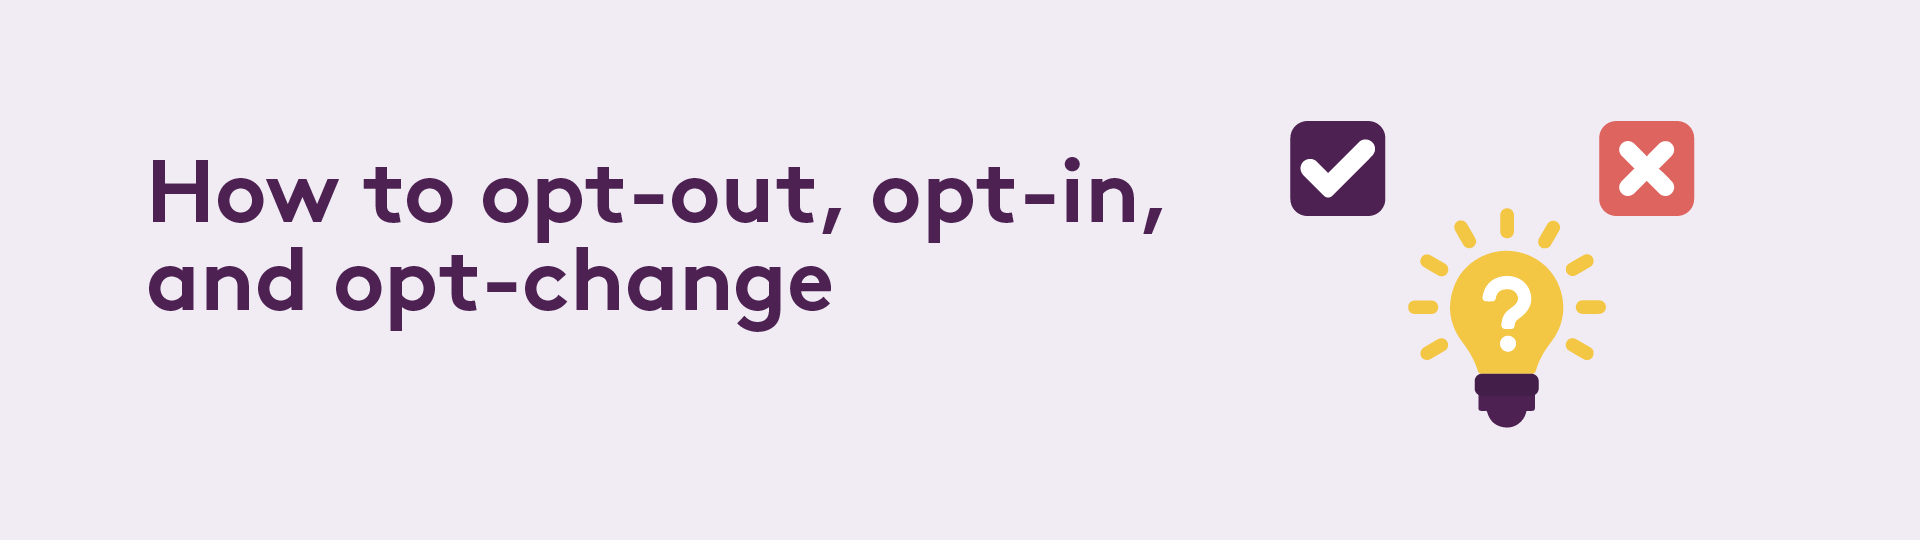 How to opt-out, opt-in, and opt-change